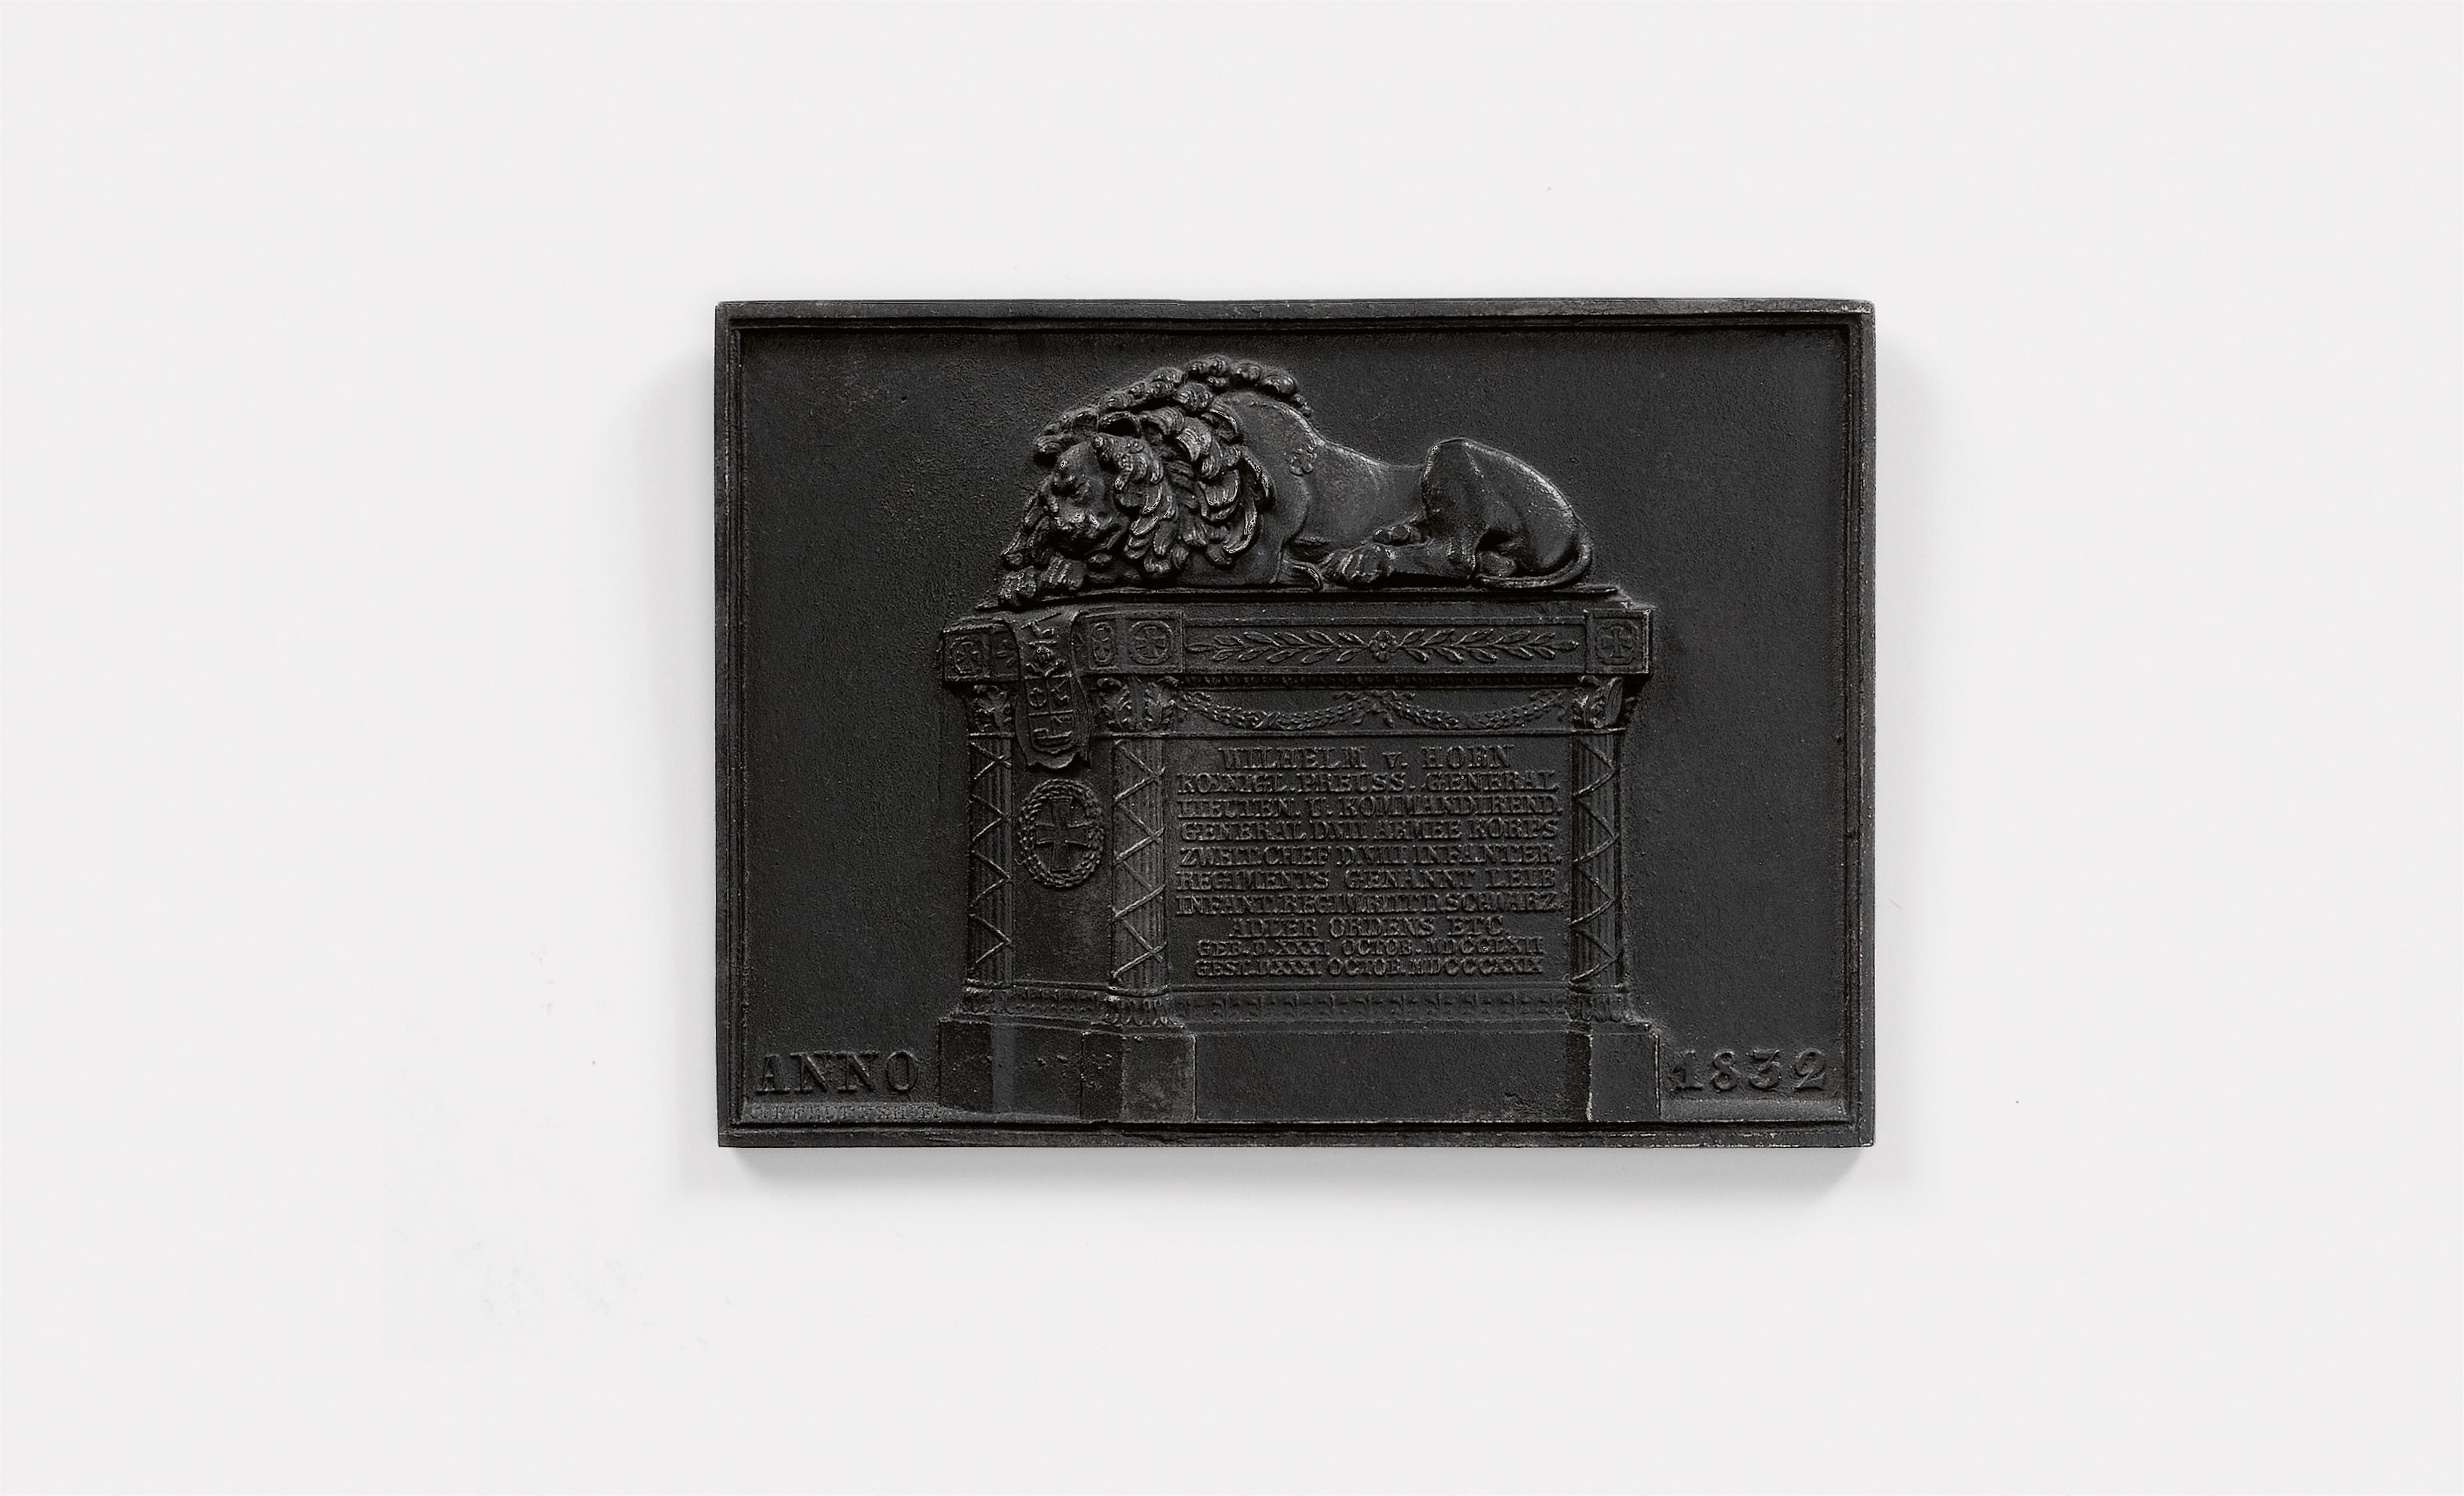 A cast iron New Year's plaque inscribed "ANNO 1832" - image-1